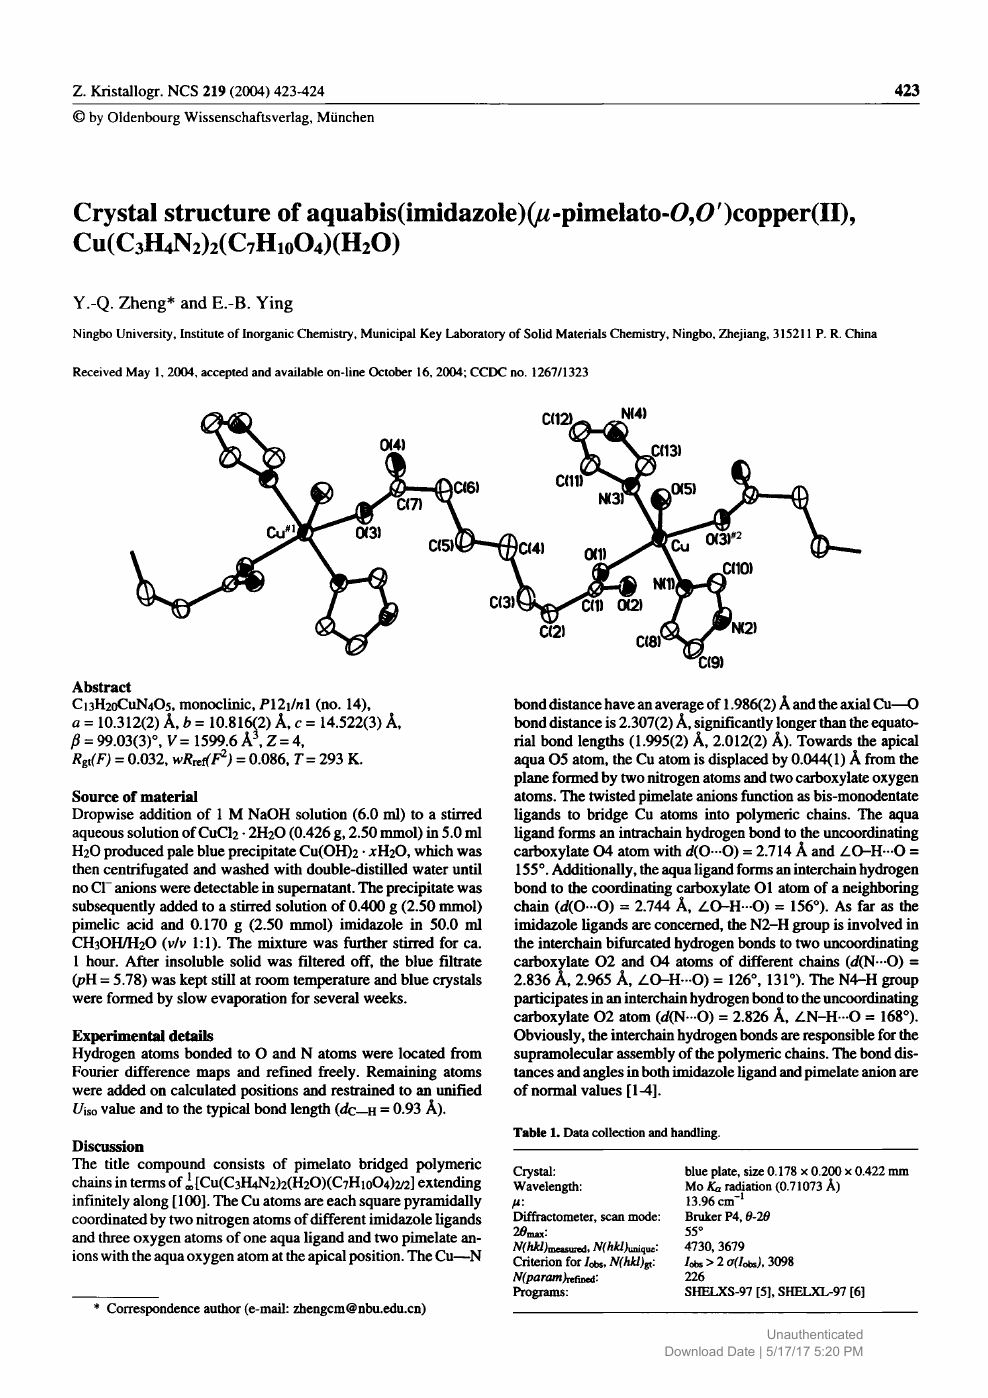 Crystal Structure Of Aquabis Imidazole M Pimelato O O Copper Ii Cu C3h4n2 2 C7h10o4 H2o Topic Of Research Paper In Materials Engineering Download Scholarly Article Pdf And Read For Free On Cyberleninka Open Science Hub